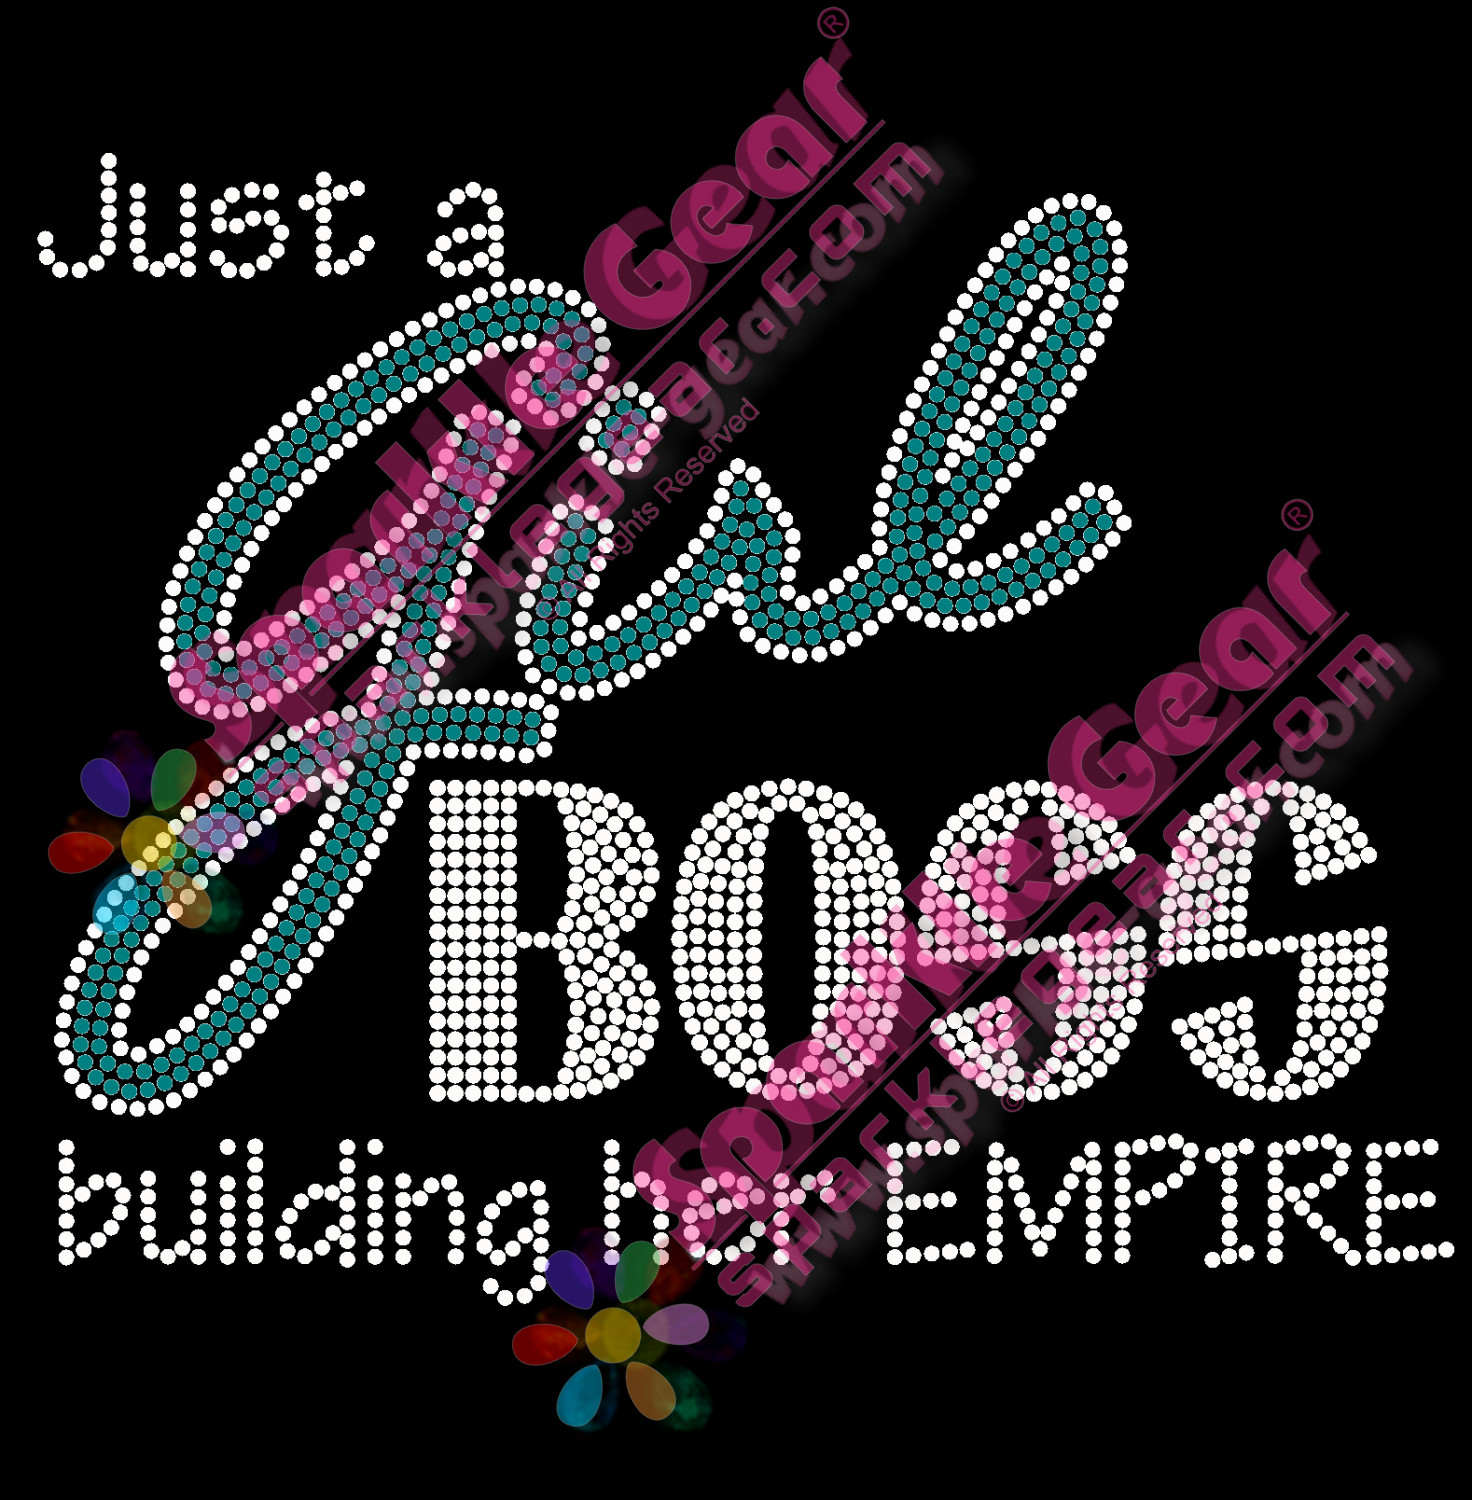 Just a Girl Boss Building Her Empire - Sparkle Gear